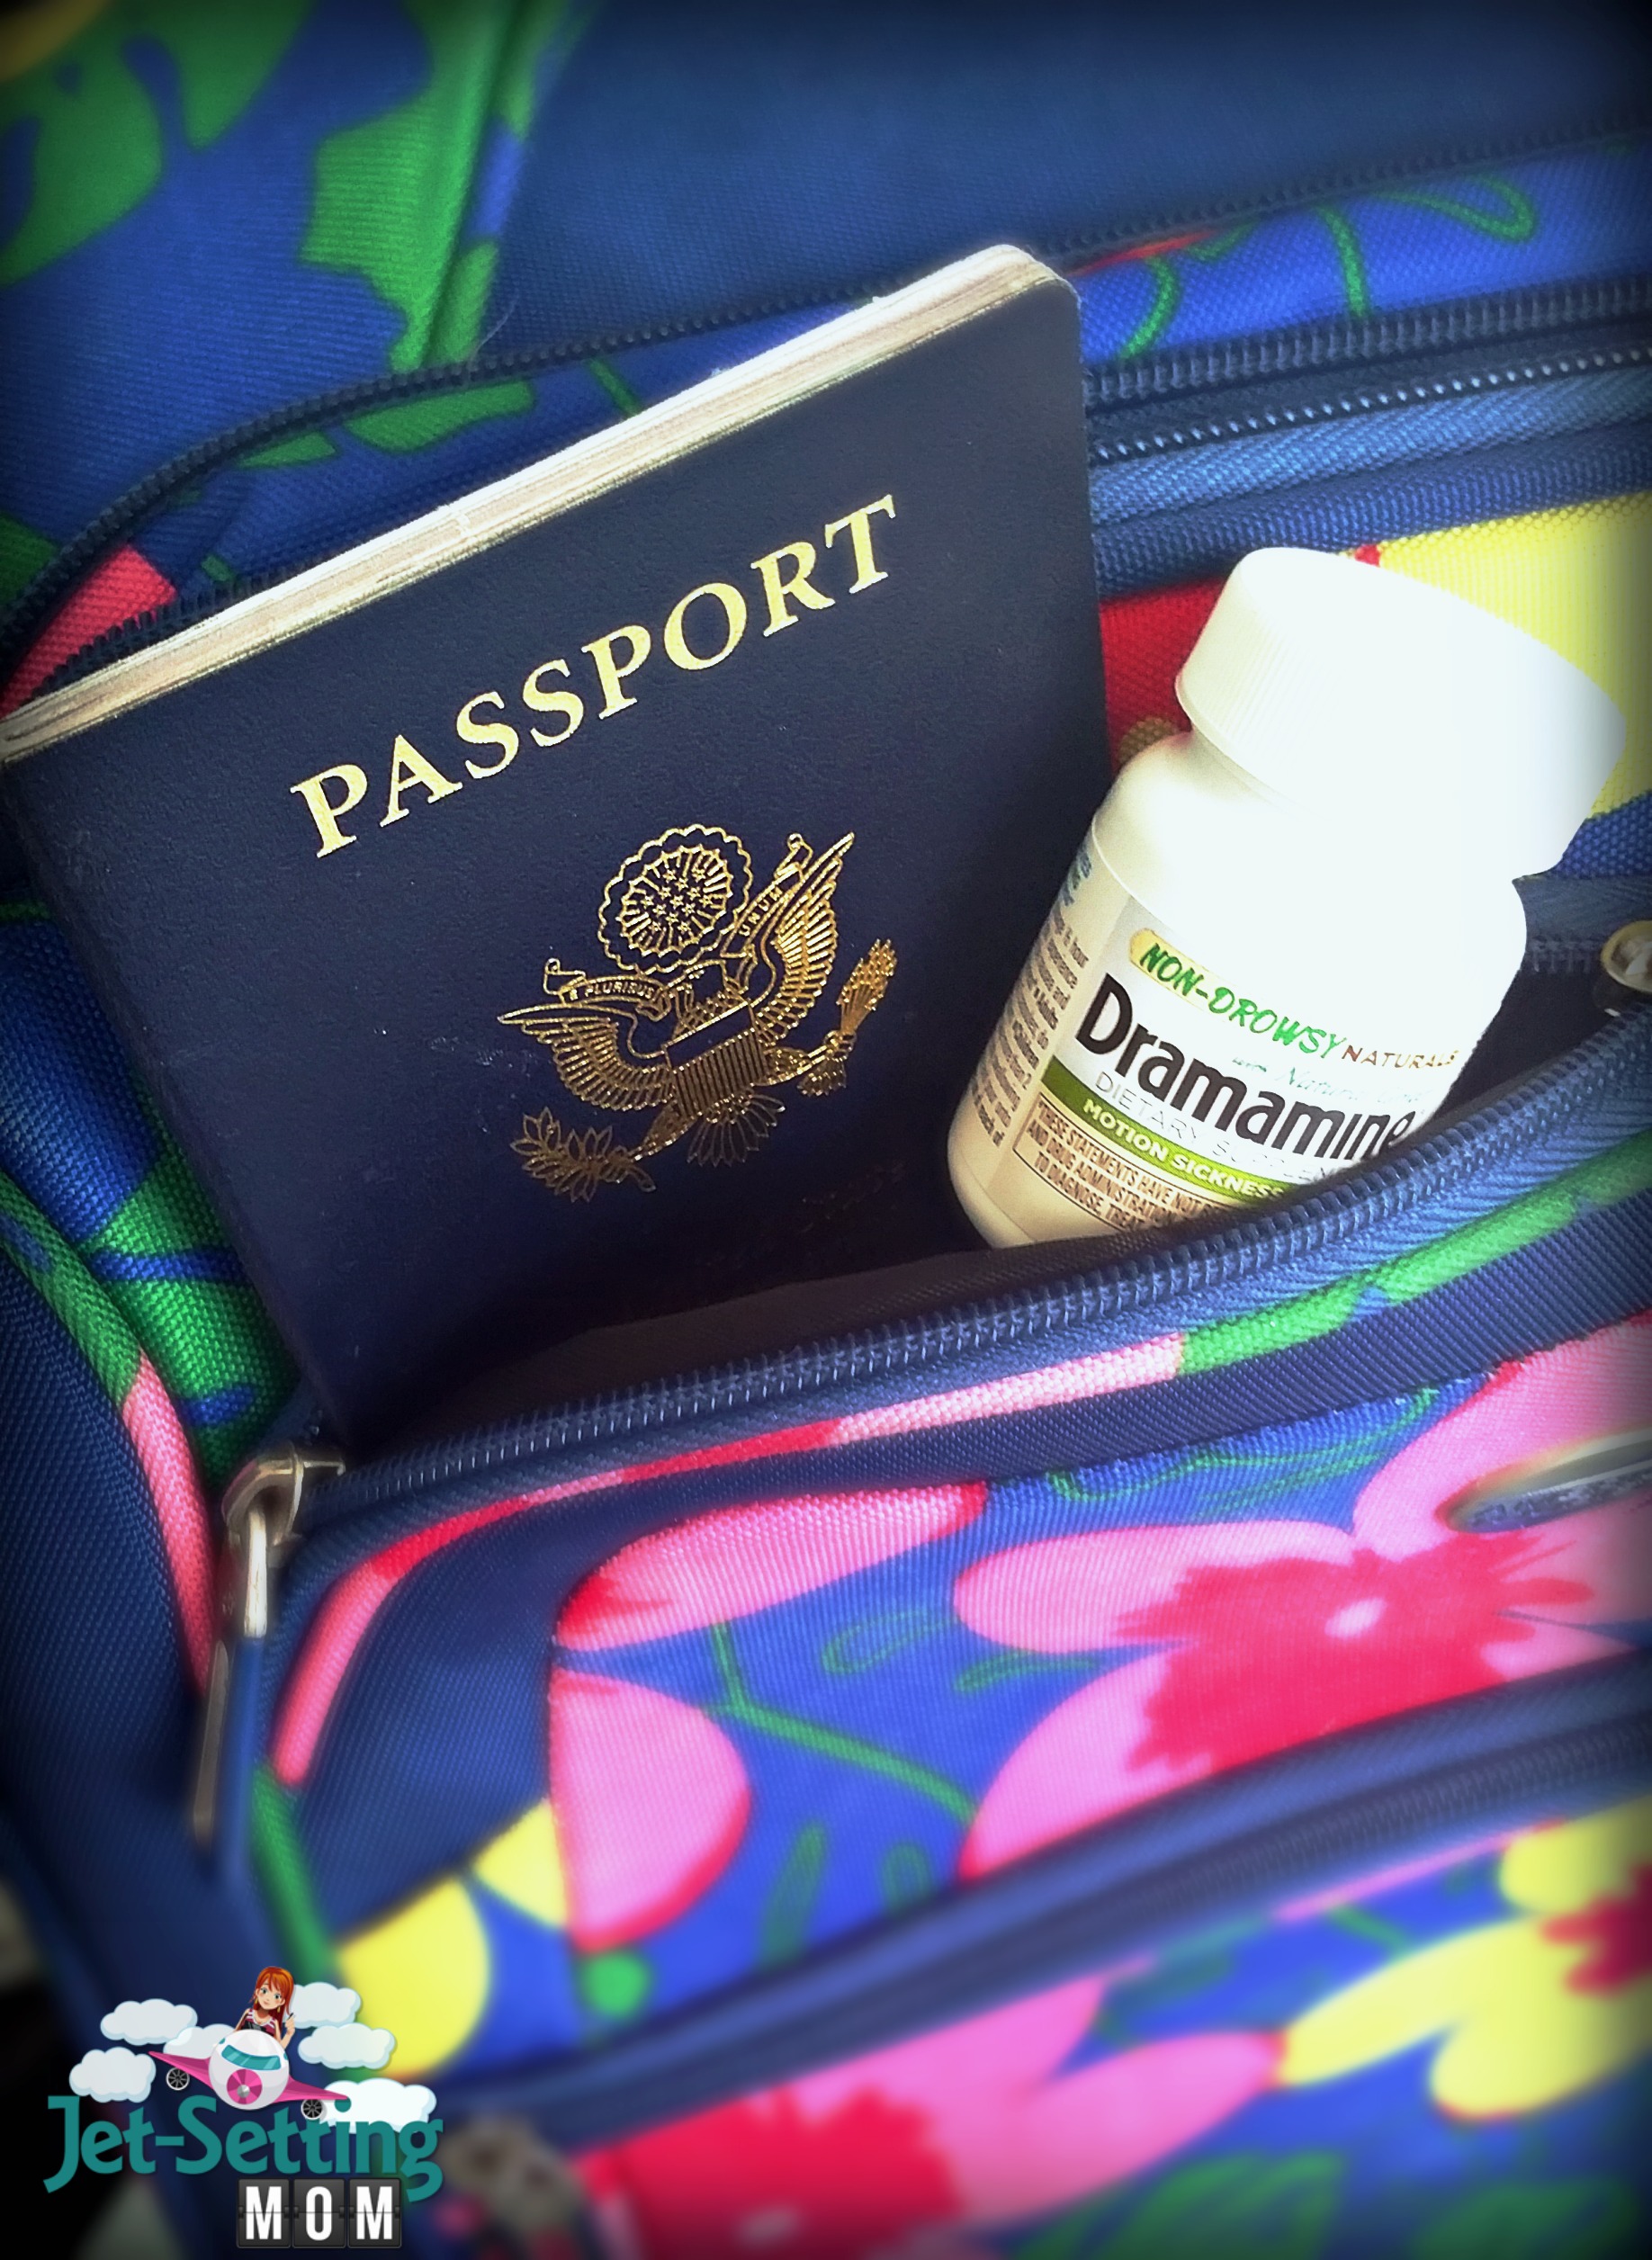 I never travel without Dramamine® Non-Drowsy Naturals #AdventuresInMotion #IC #ad #travel #traveltips